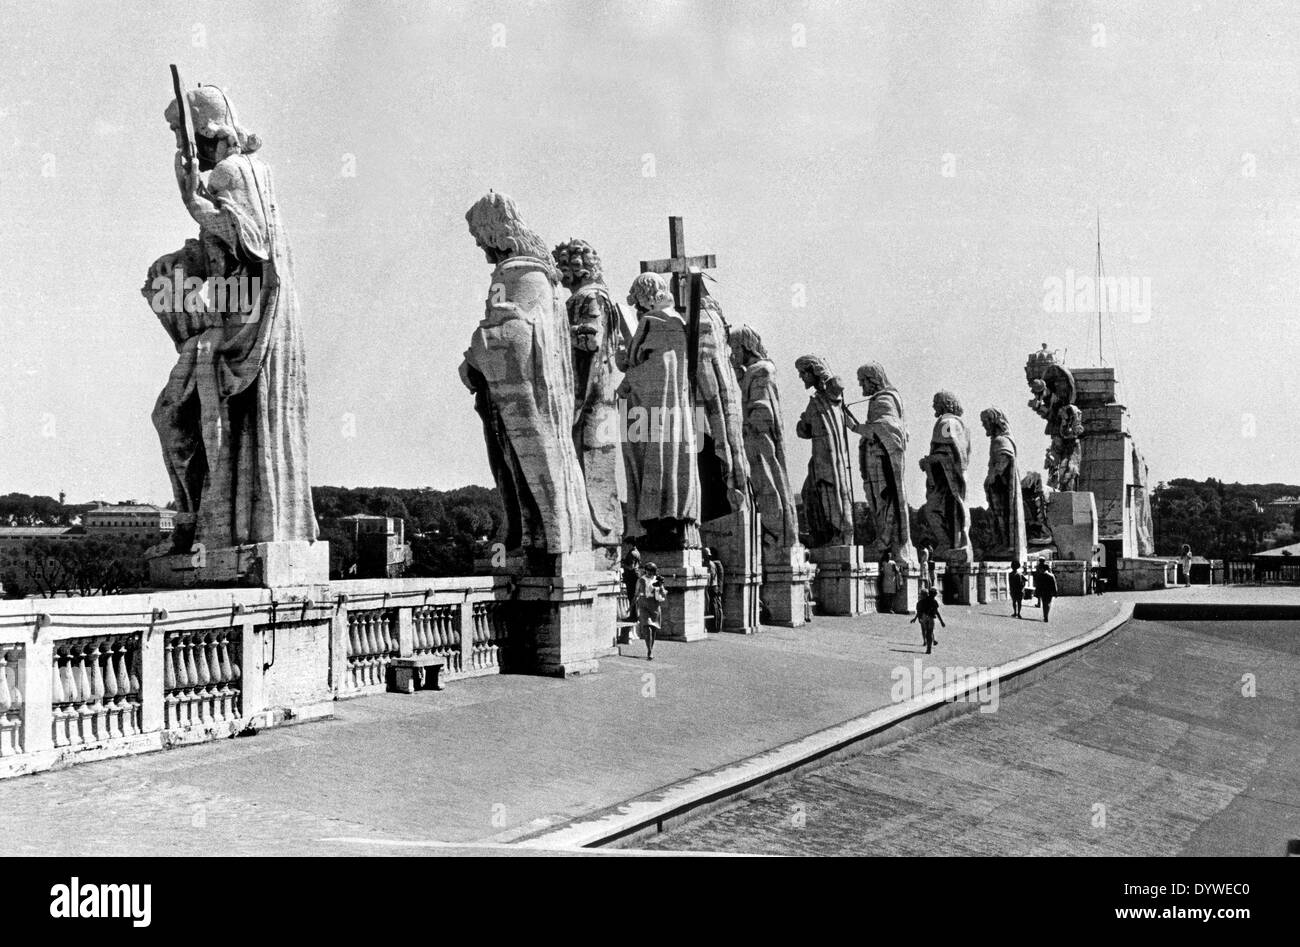 Statues of the apostles on the roof of the St Peter's Cathedral in Rome 1968. Rome city basilica 1960s historic Italy Italian Picture by David Bagnall Stock Photo